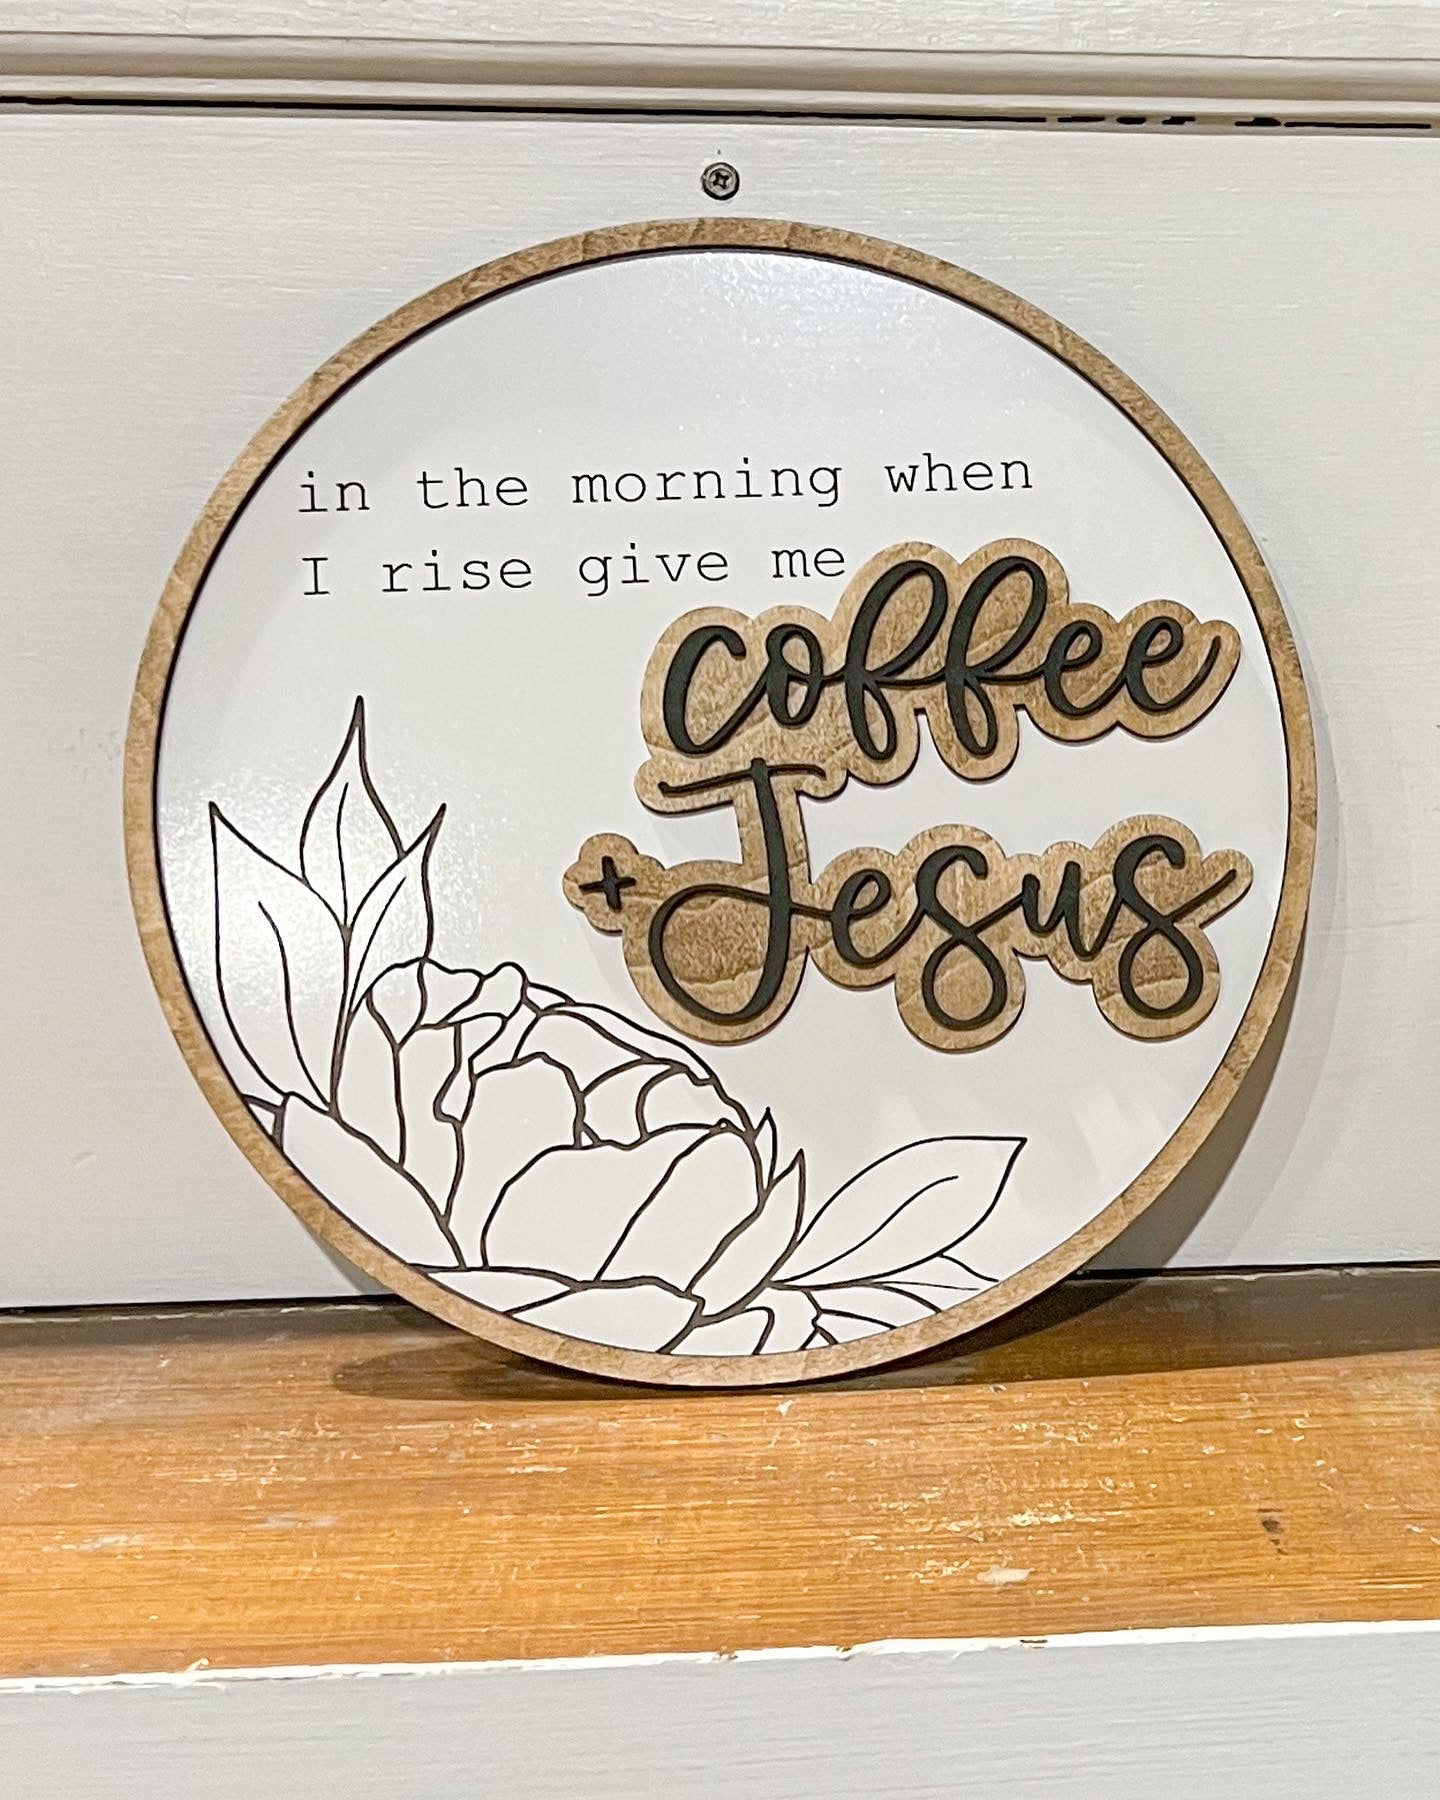 When I rise give me Coffee + Jesus